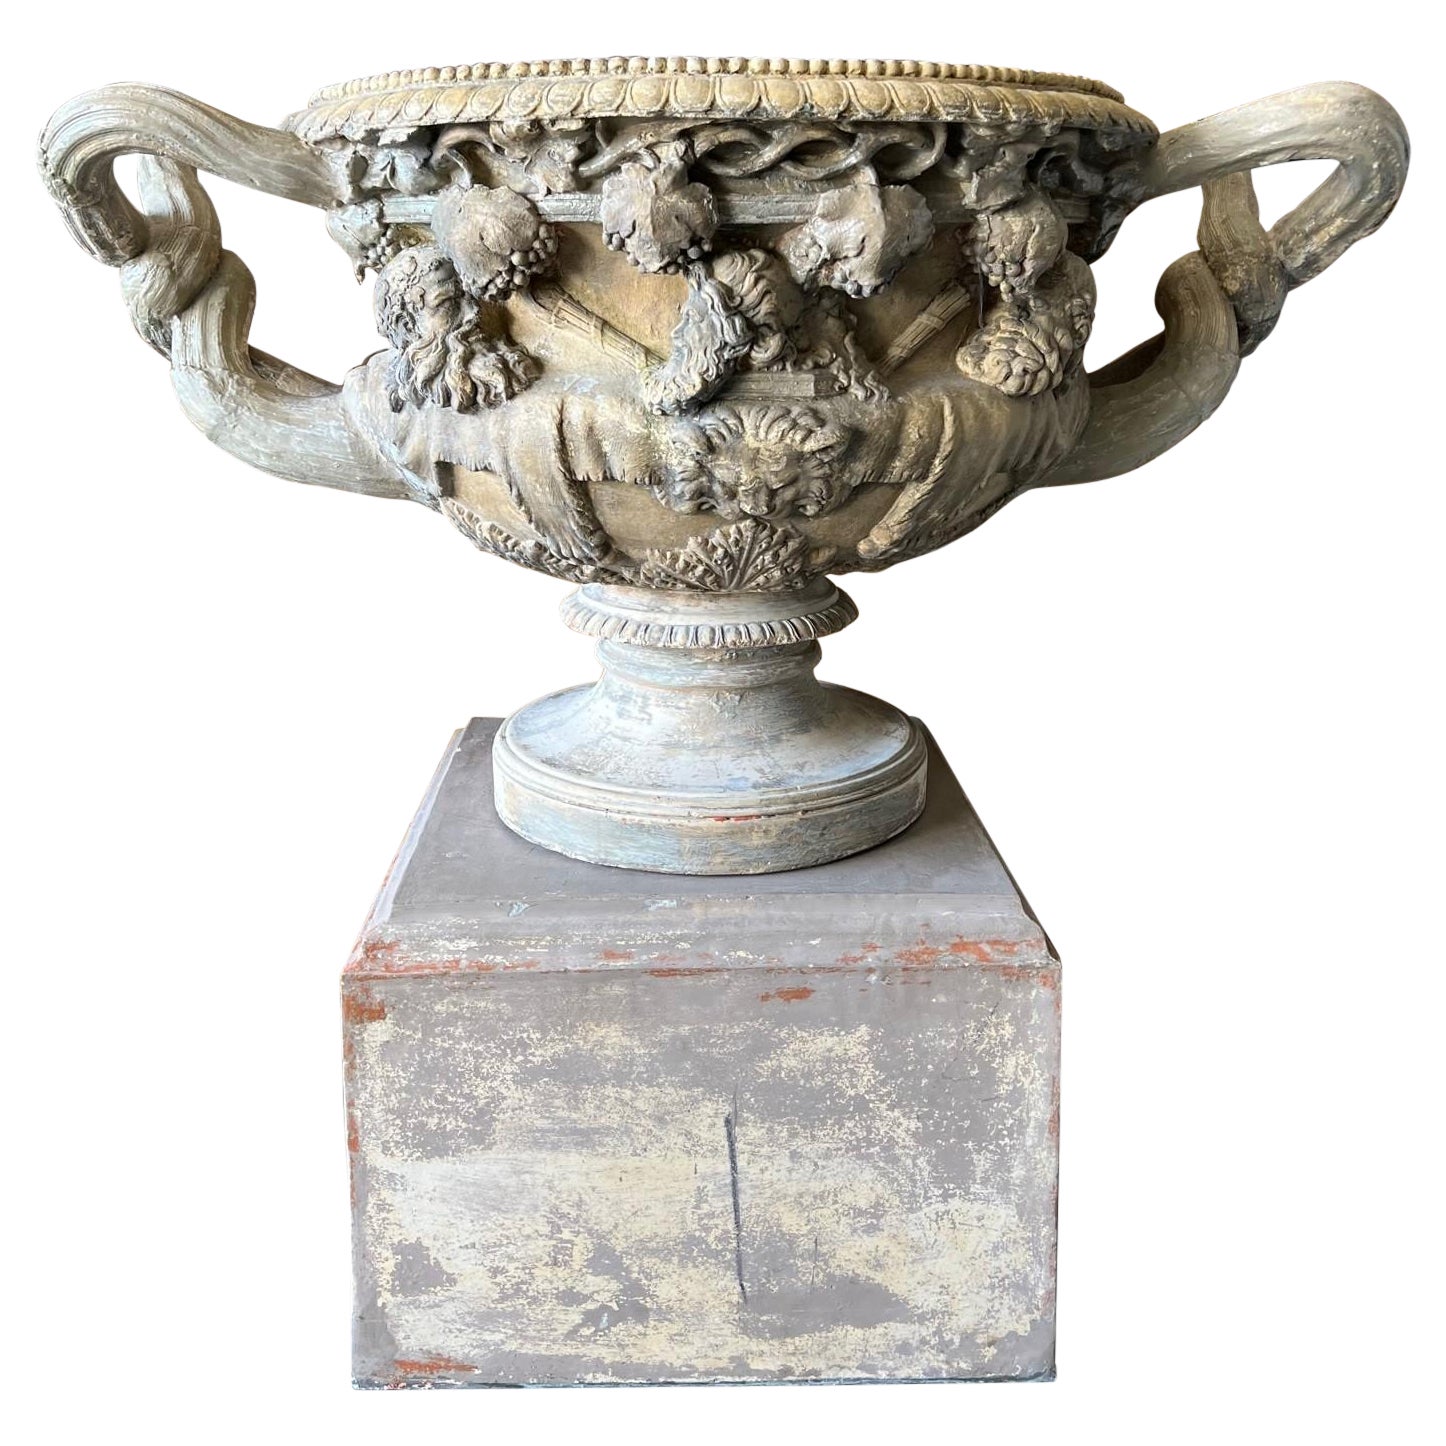  Monumental 20th Century Terracotta Urn with Large Handles on a Pedestal For Sale